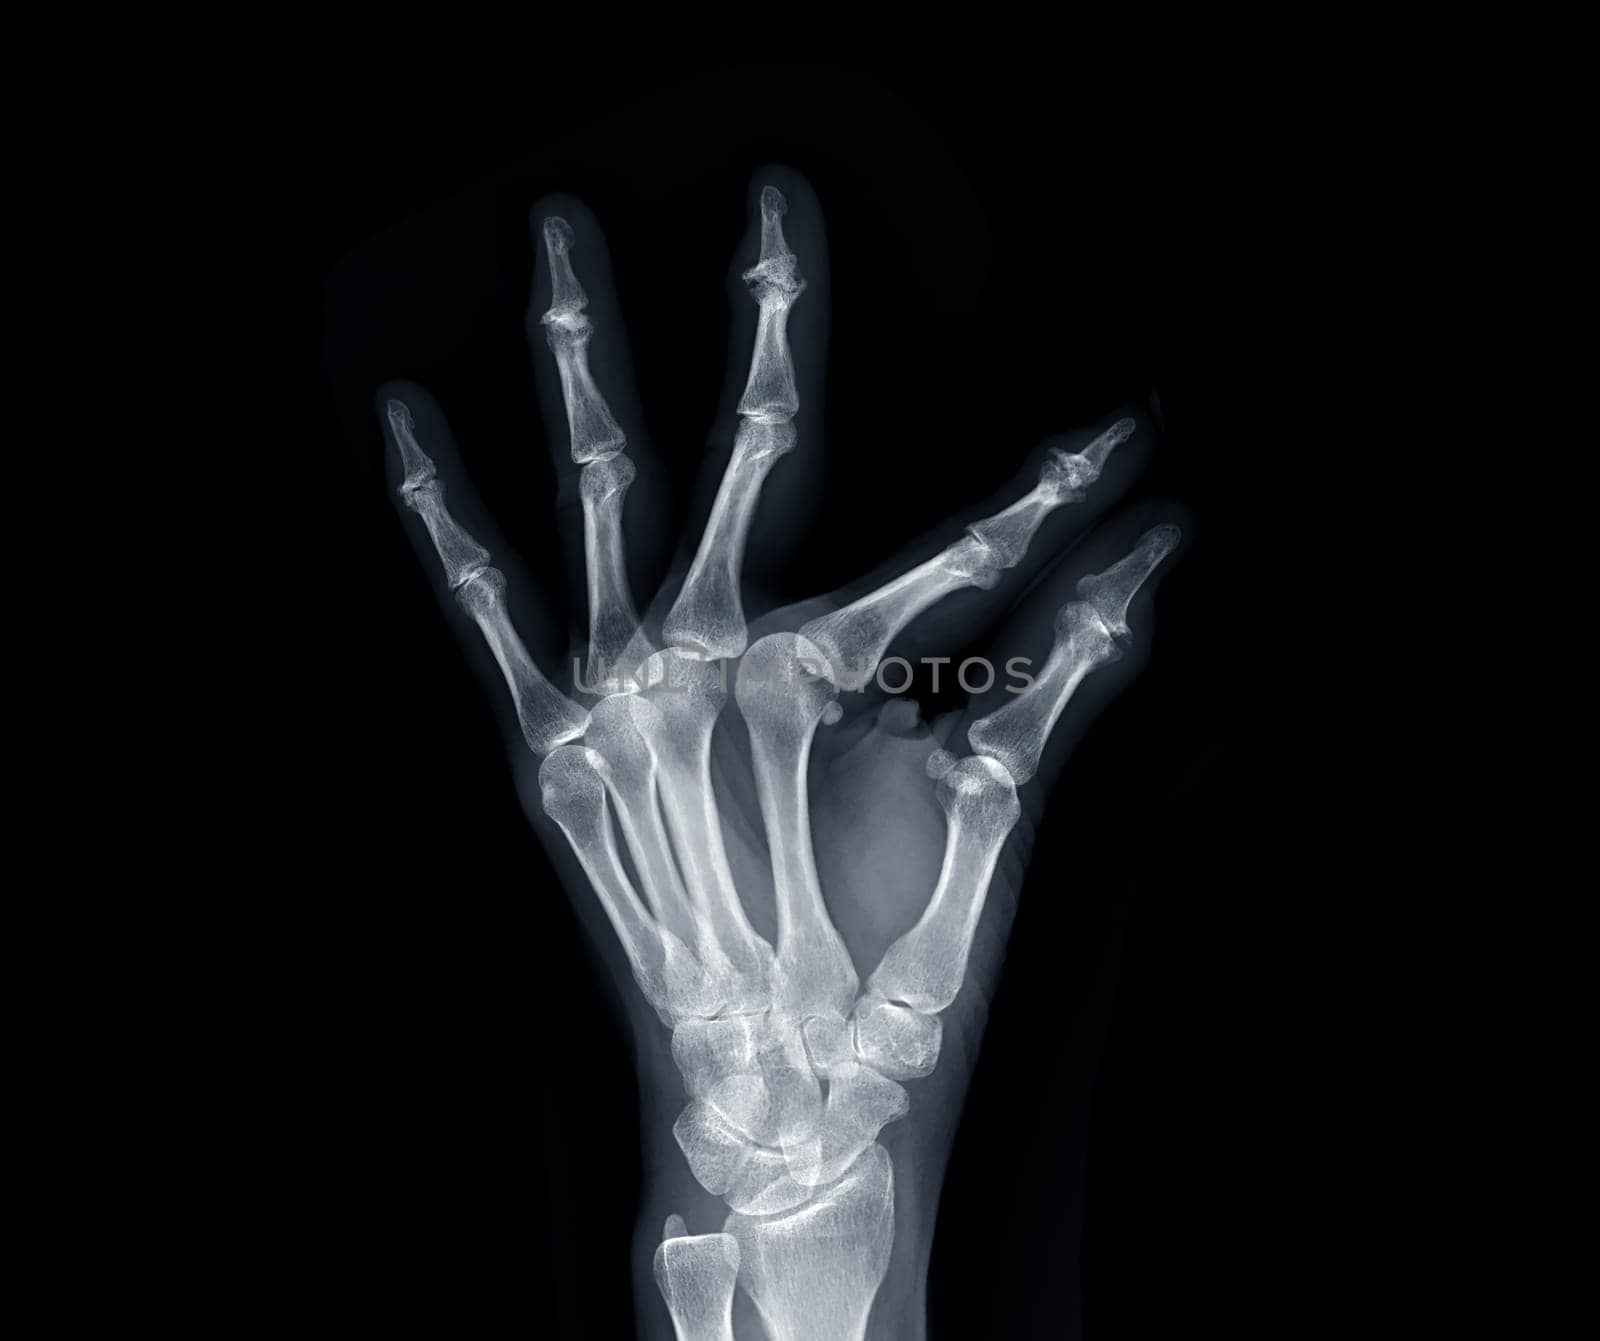 Film x-ray both hand AP view show human's hands isolated on black background . by samunella